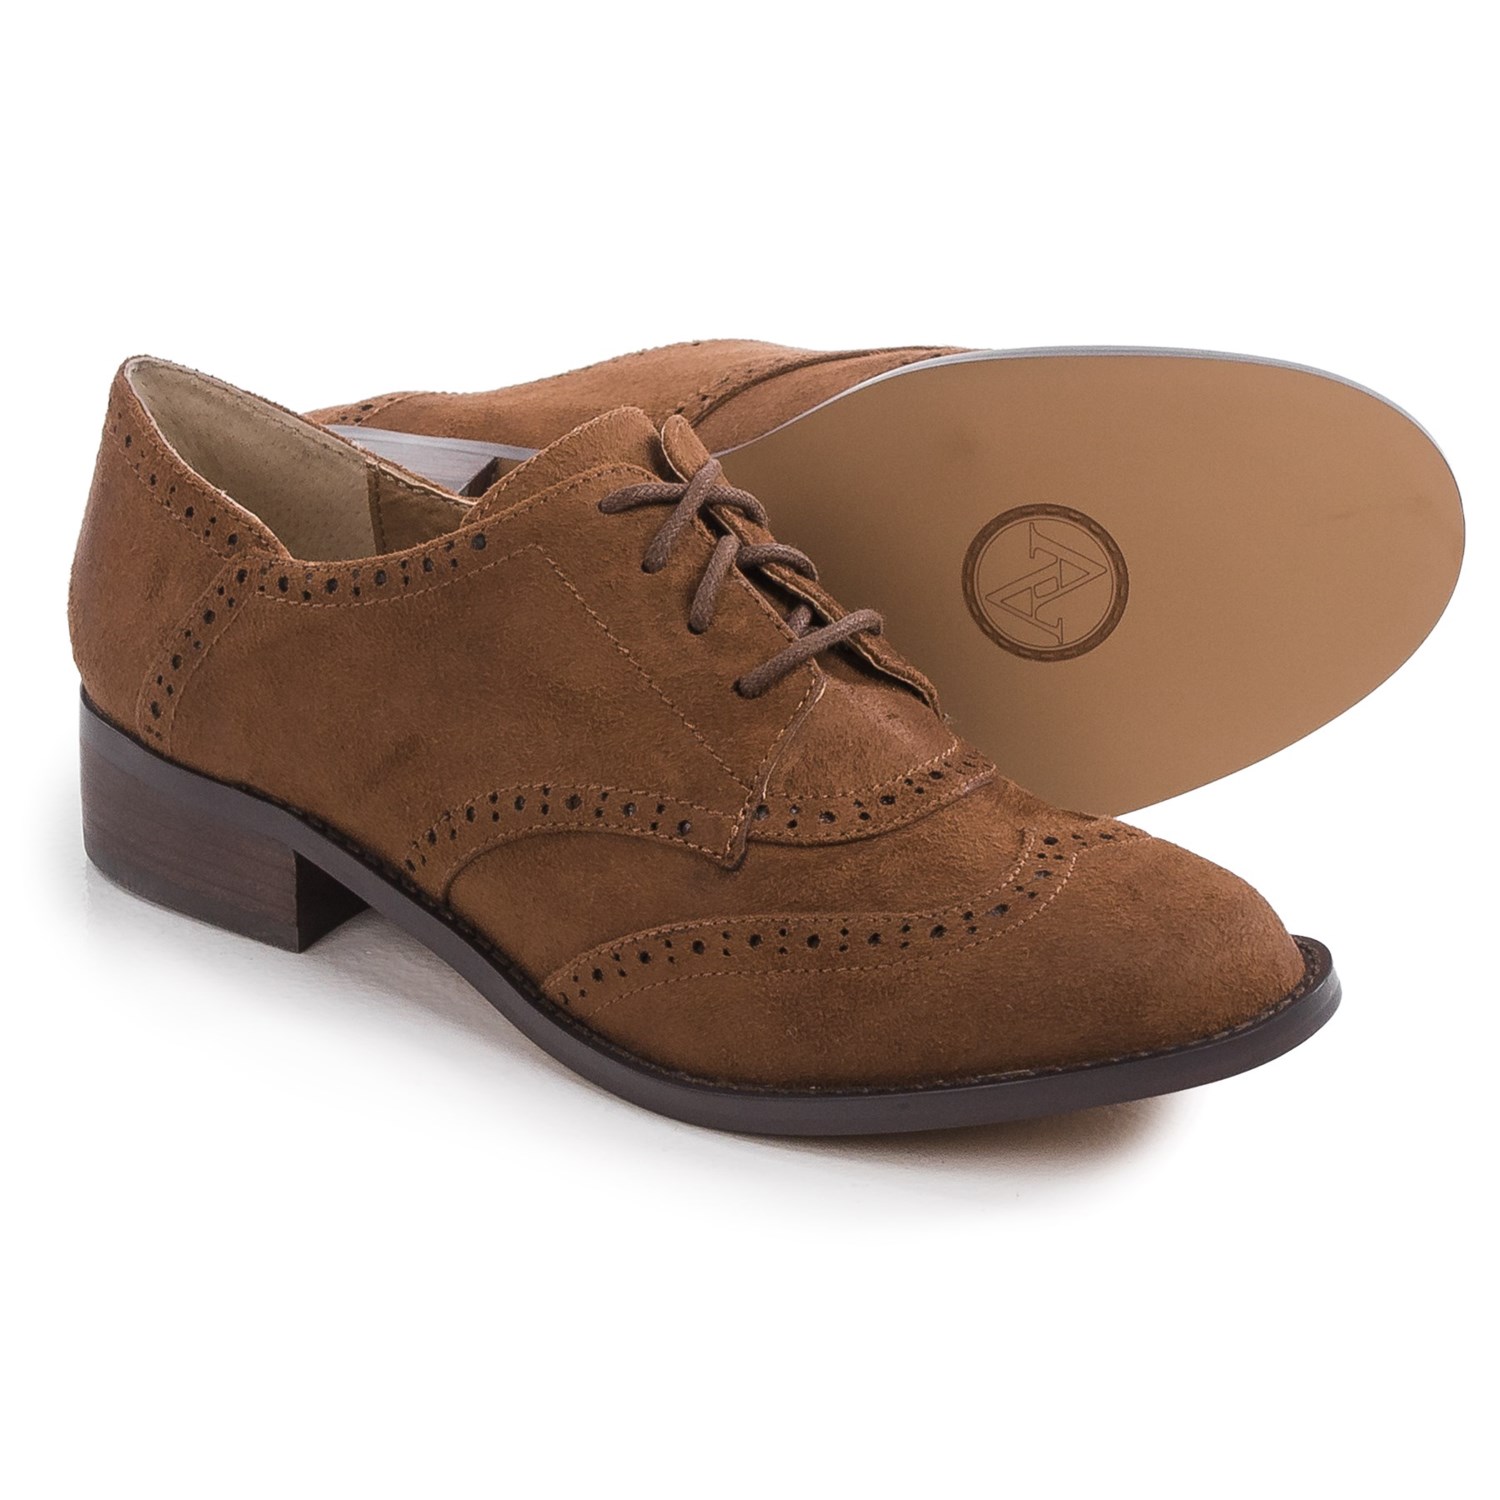 Adrienne Vittadini Biome Oxford Shoes (For Women) - Save 62%